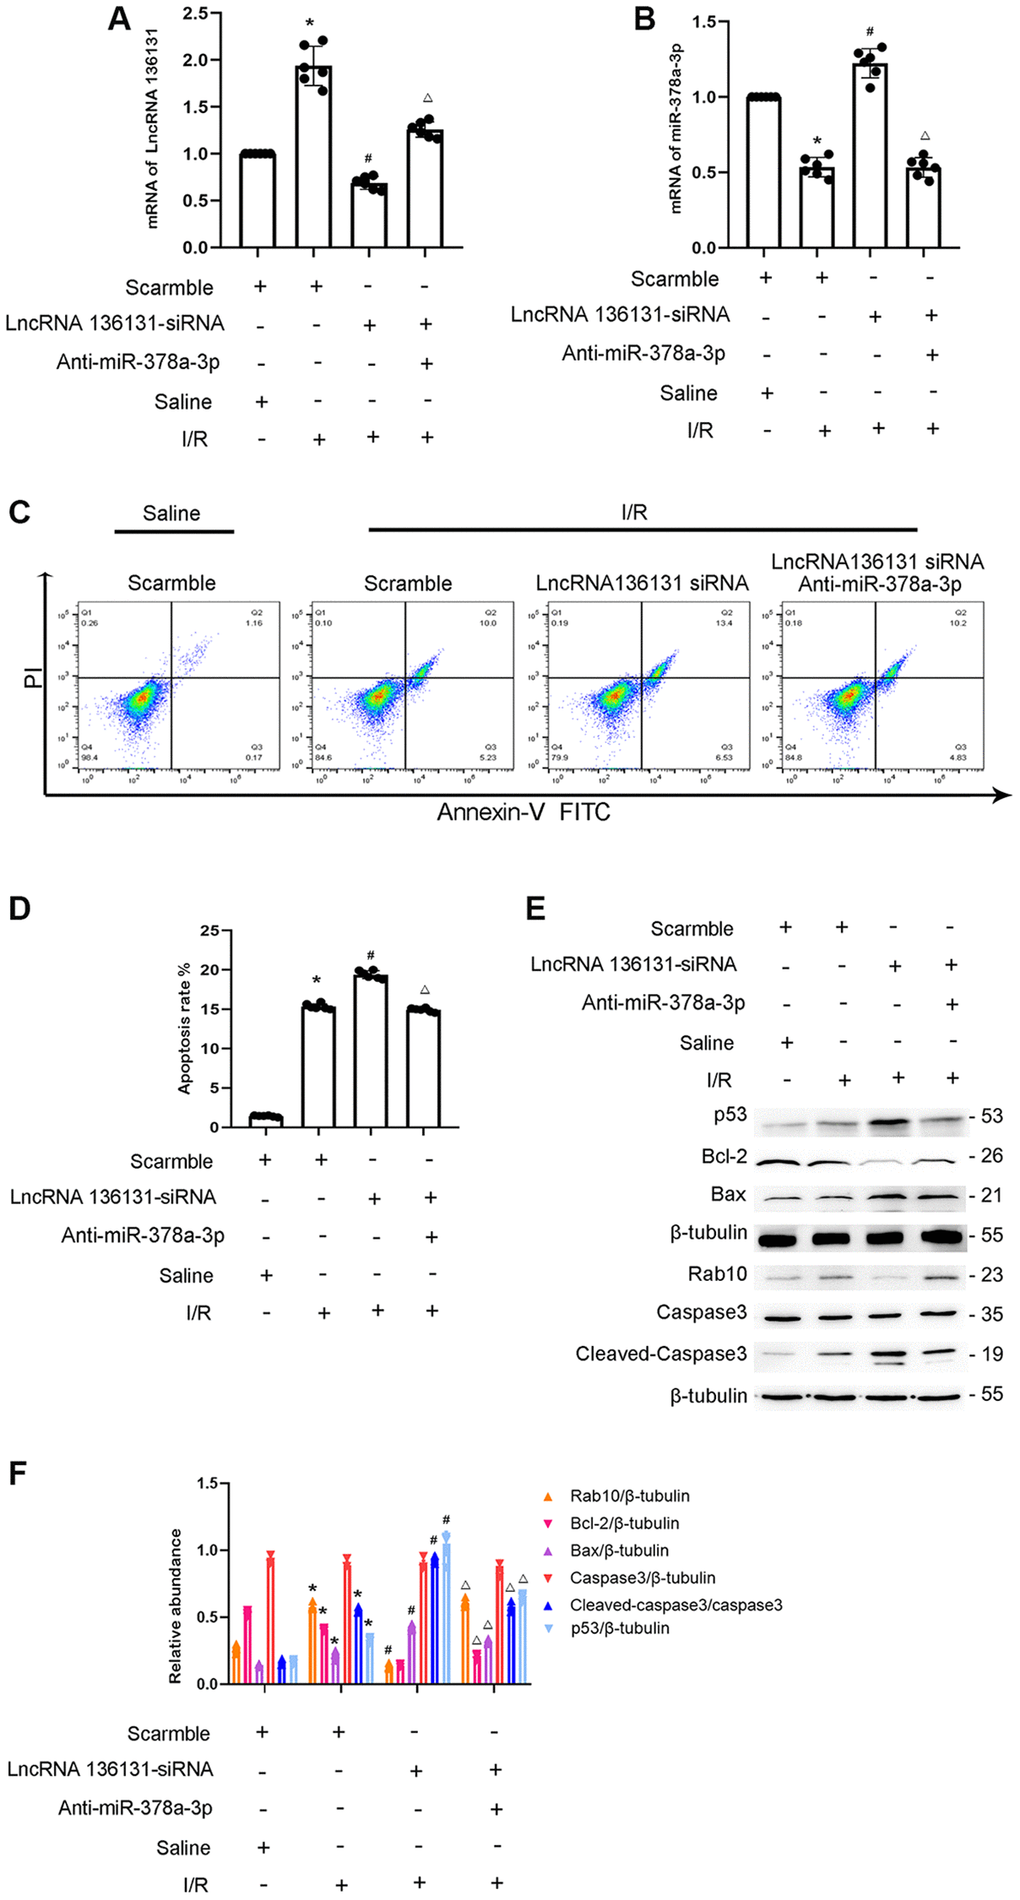 LncRNA136131 knockdown aggravated the I/R-Induced BUMPT cells apoptosis and the expression of cleaved caspase3, this was reversed by miR-378a-3p inhibitor. BUMPT cells were co-transfected with siRNA lncRNA136131 (100 nM) plus with or without anti-miR-378a-3p, and then treated with I(2 hours)/R(2 hours) injury. (A) RT-qPCR analysis the expression of lncRNA136131. (B) Real-time qPCR analysis of miR-378a-3p expression. (C) FCM analysis of BUMPT cells apoptosis. (D) Cell apoptosis rate (%). (E) Immunoblot analysis of caspase 3, cleaved-caspase3, Bax, Blc-2, p53 and Rab10. (F) Densitometric measurement of protein signals. Data are expressed as mean ± SD (n = 6). *p #p Δp 